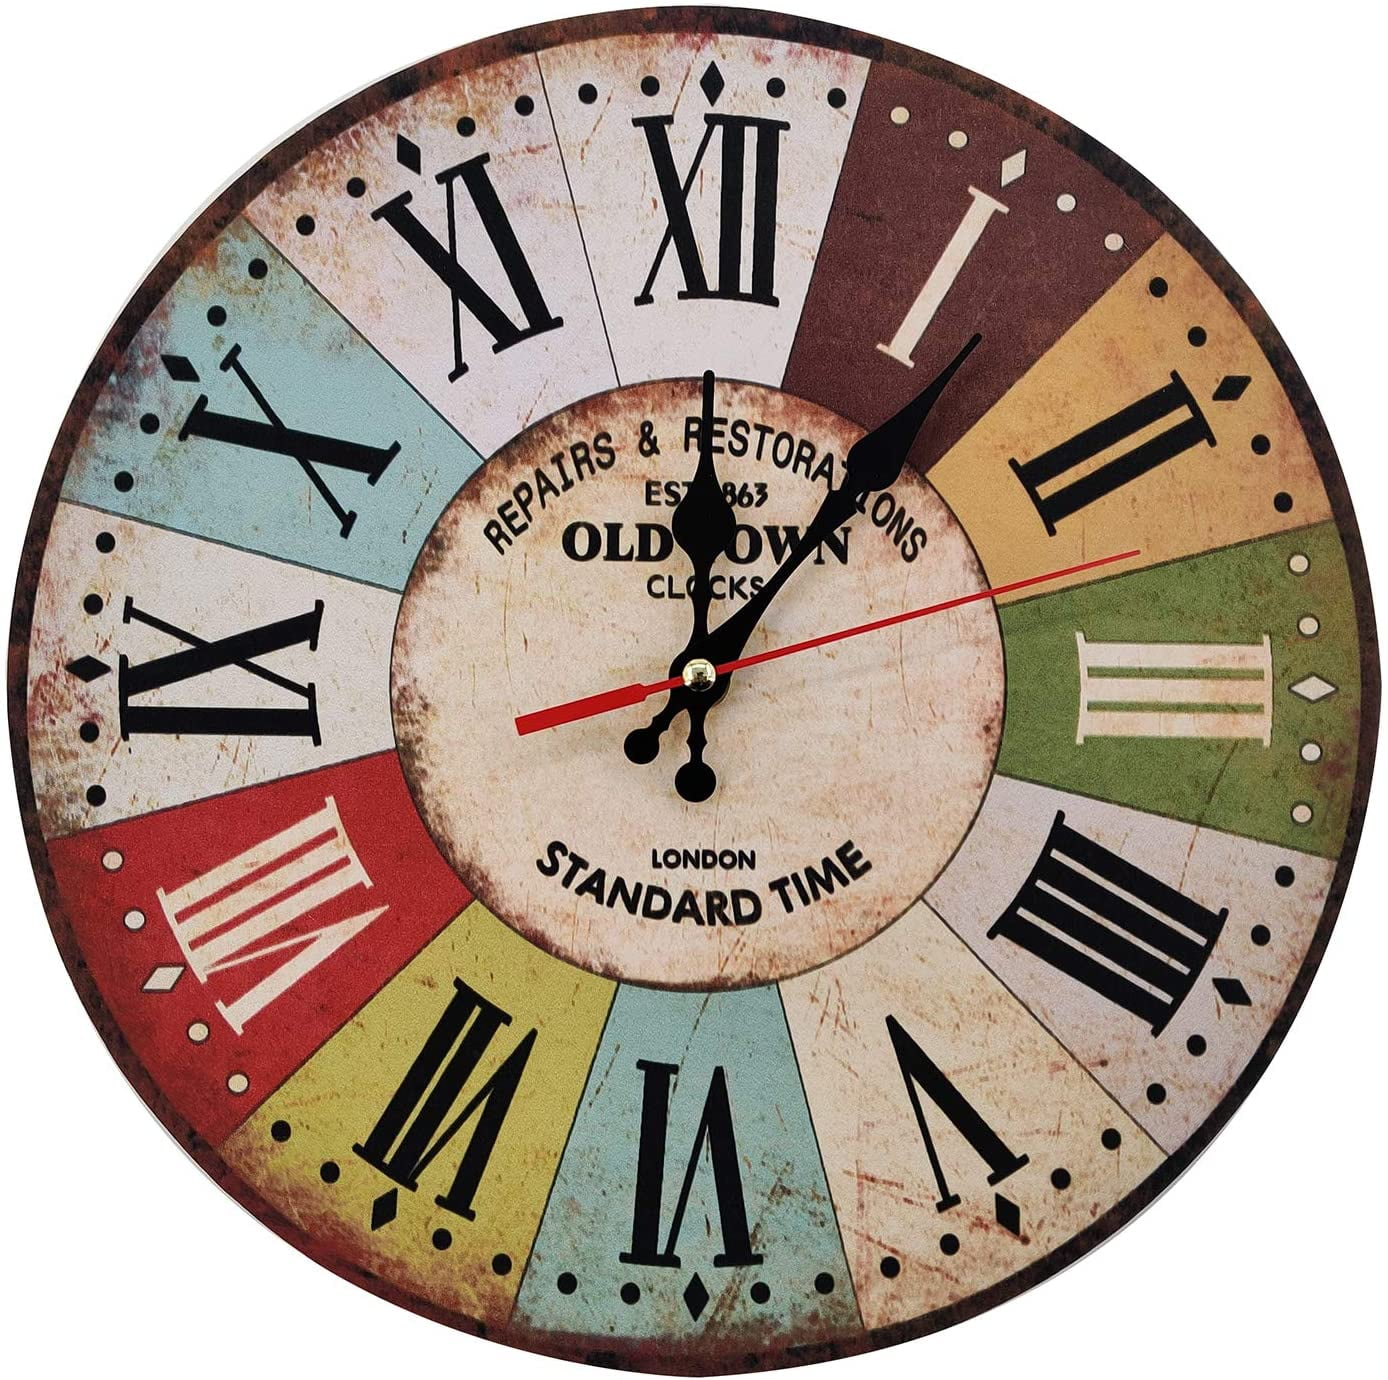 Large Battery Operated Wall Clock Black Plumeet Non Ticking Classic Retro Silent Clocks for Kitchen Bedroom Colorful Tuscan Country Farmhouse Style Decorative 13‘’ Vintage Rustic Wall Clock 